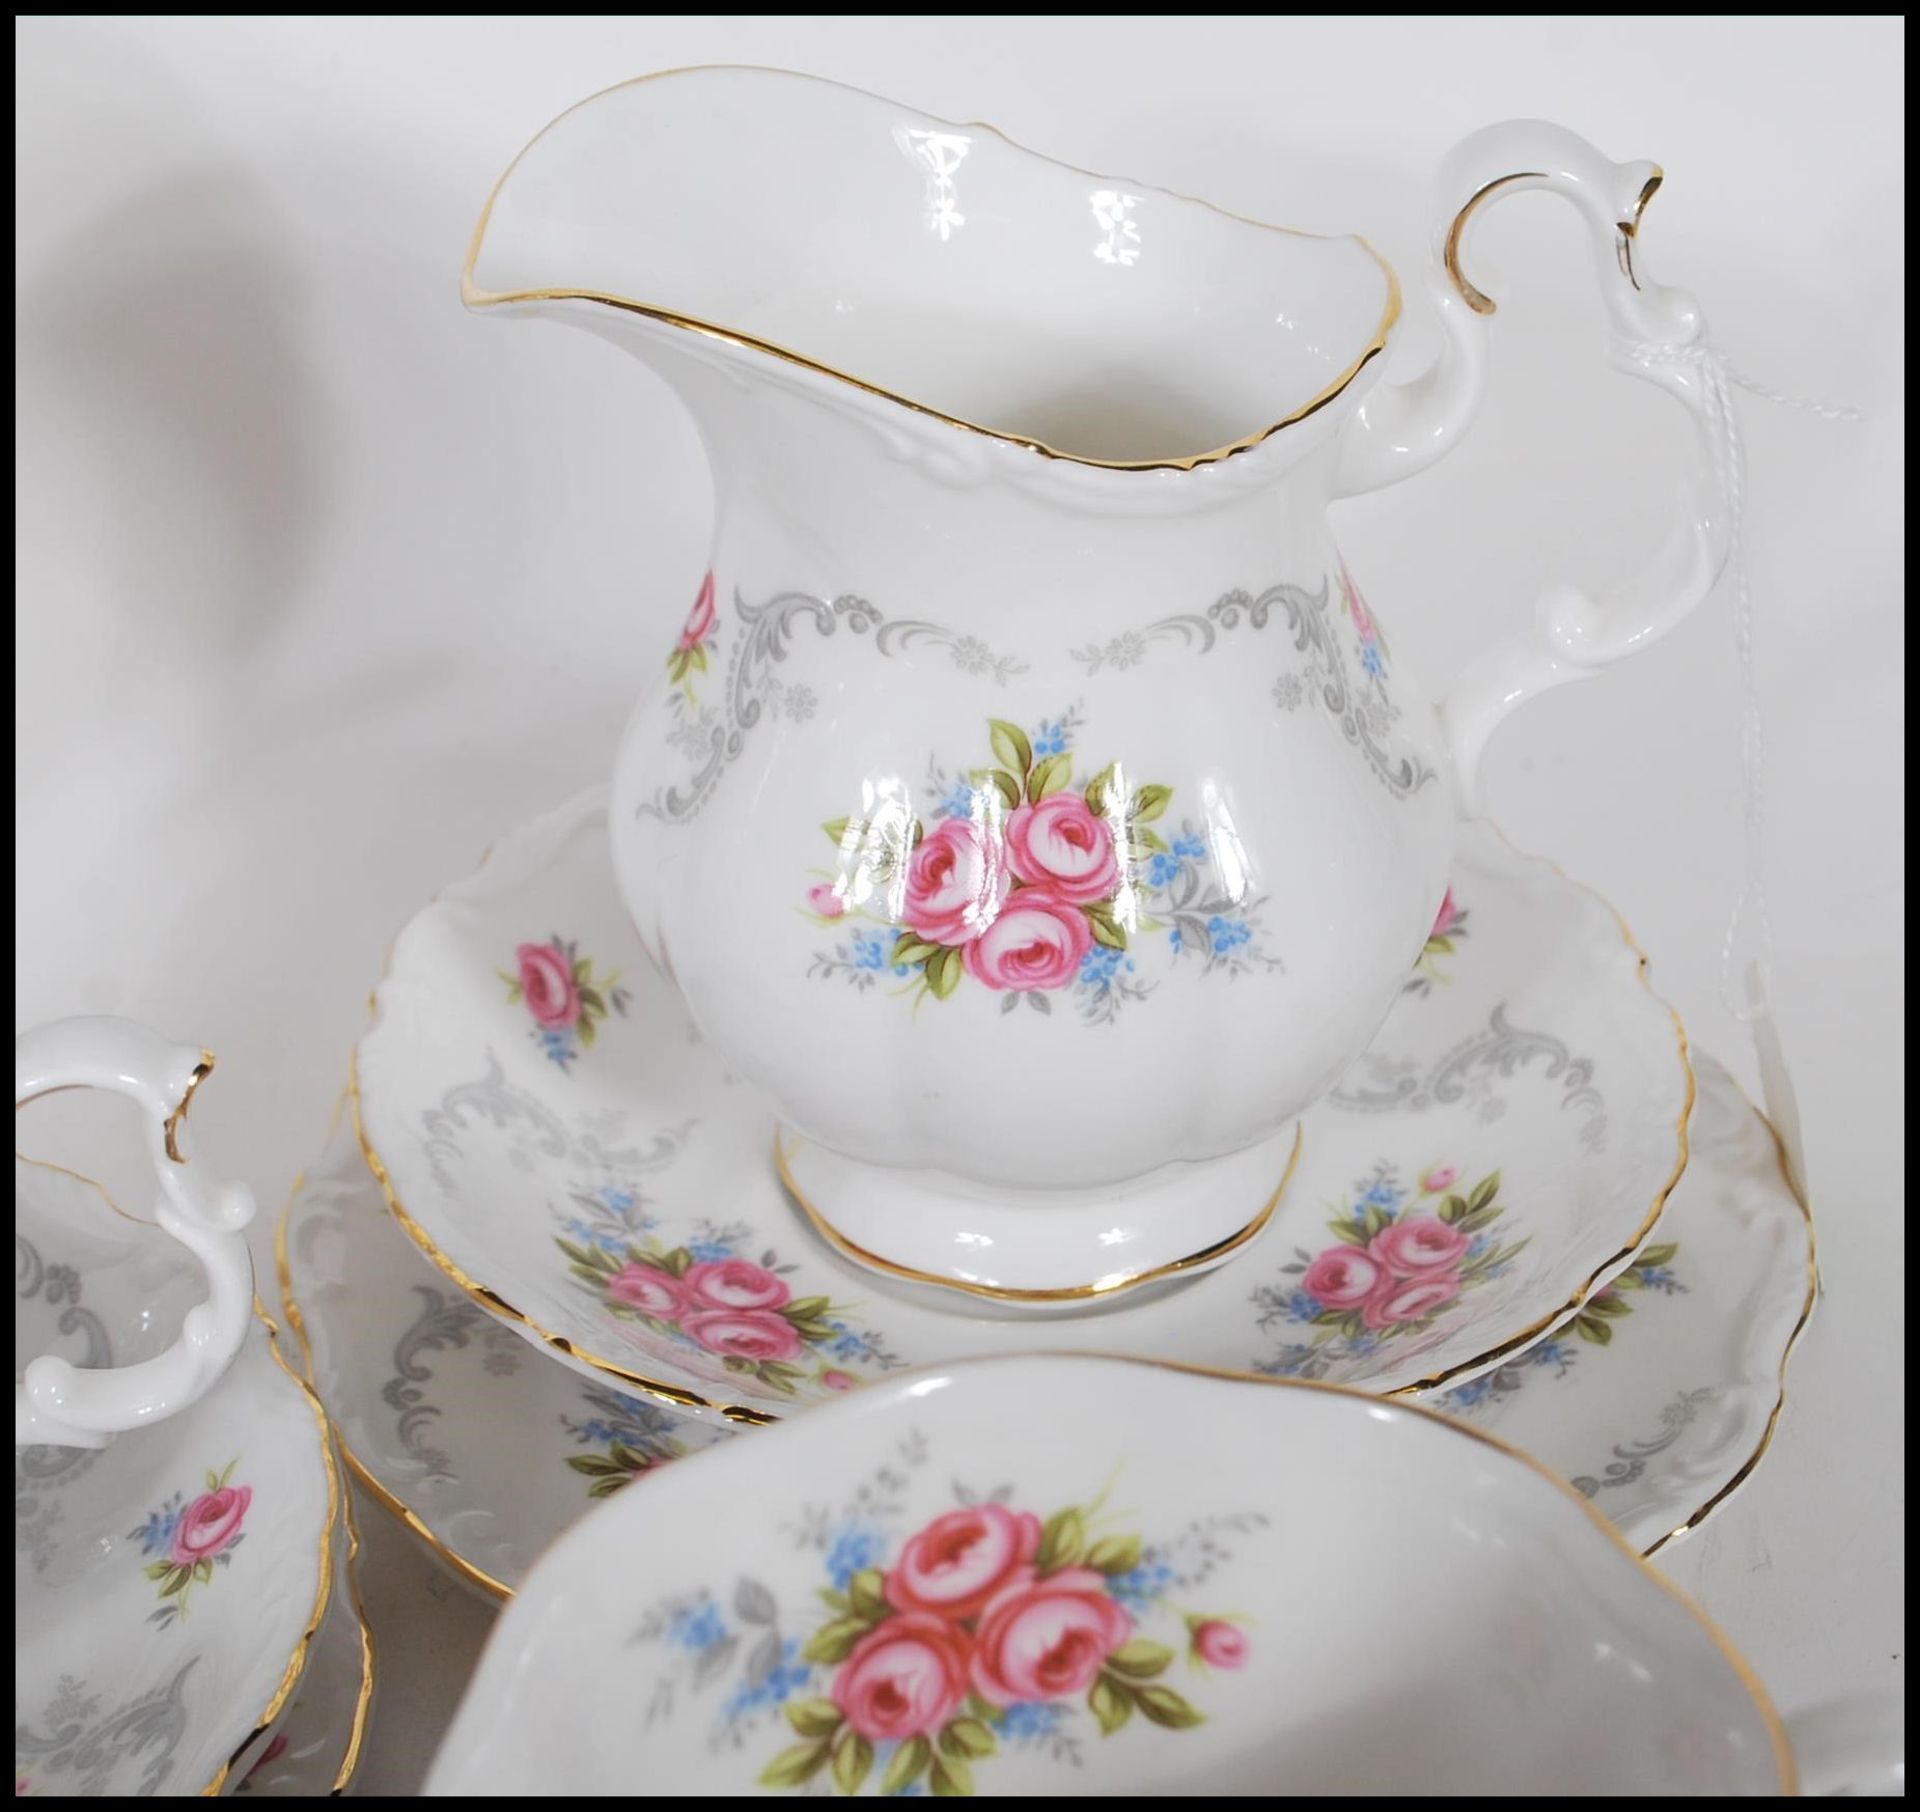 A Royal Albert tea service in the Tranquillity pattern having floral and gray foliate decoration - Image 6 of 8